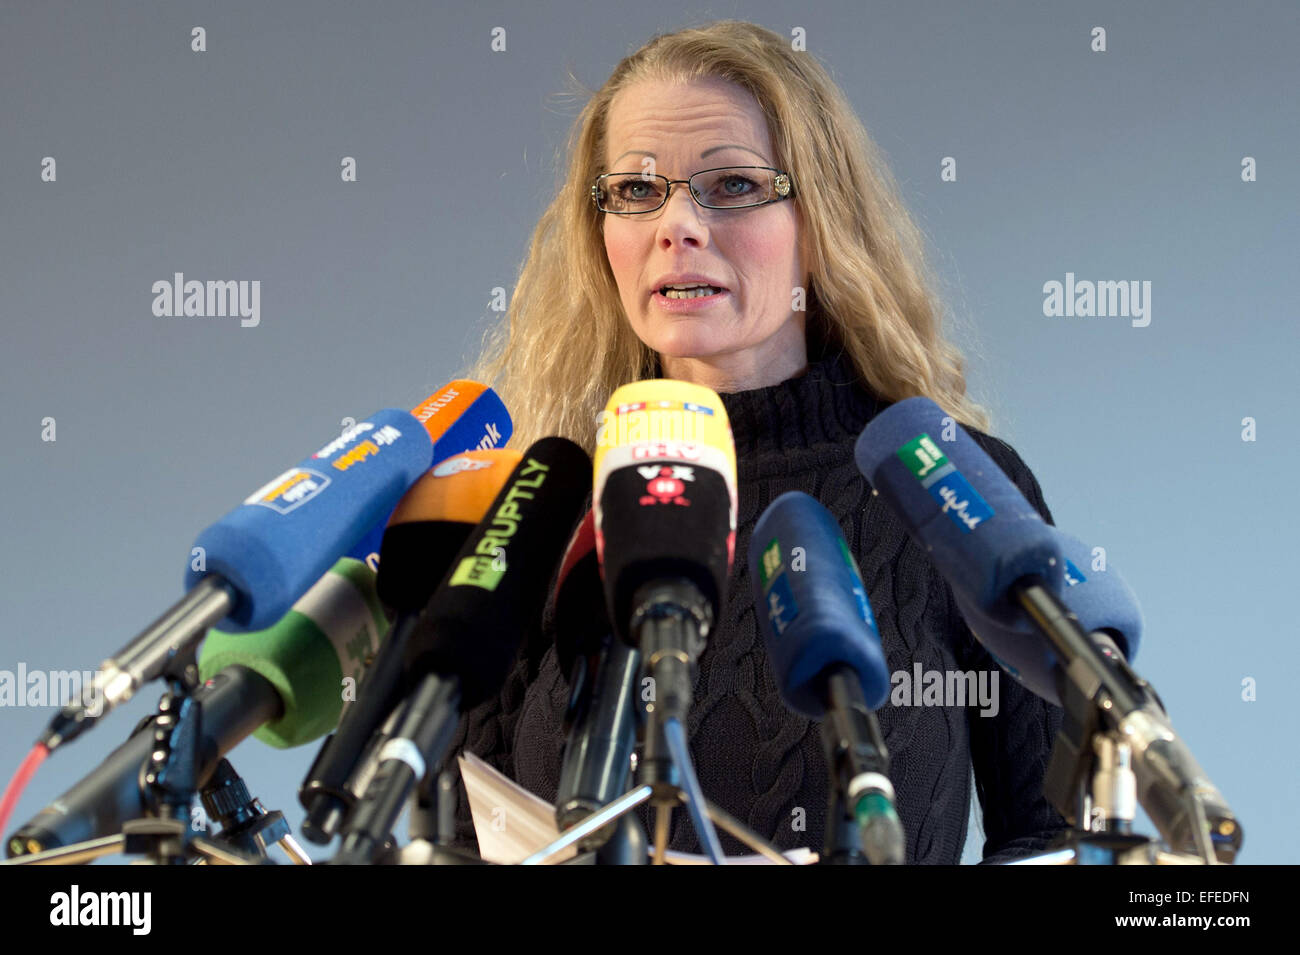 Dresden, Germany. 02nd Feb, 2015. Former spokeswoman of the German anti-Islam movement Pegida (Patriotic Europeans Against the Islamization of the West), Kathrin Oertel, speaks during a press conference in Dresden, Germany, 02 February 2015. Oertel announced the founding of a new association called 'Direkte Demokratie fuer Europa' (lit. direct democracy for Europe). Photo: Sebastian Kahnert/dpa/Alamy Live News Stock Photo